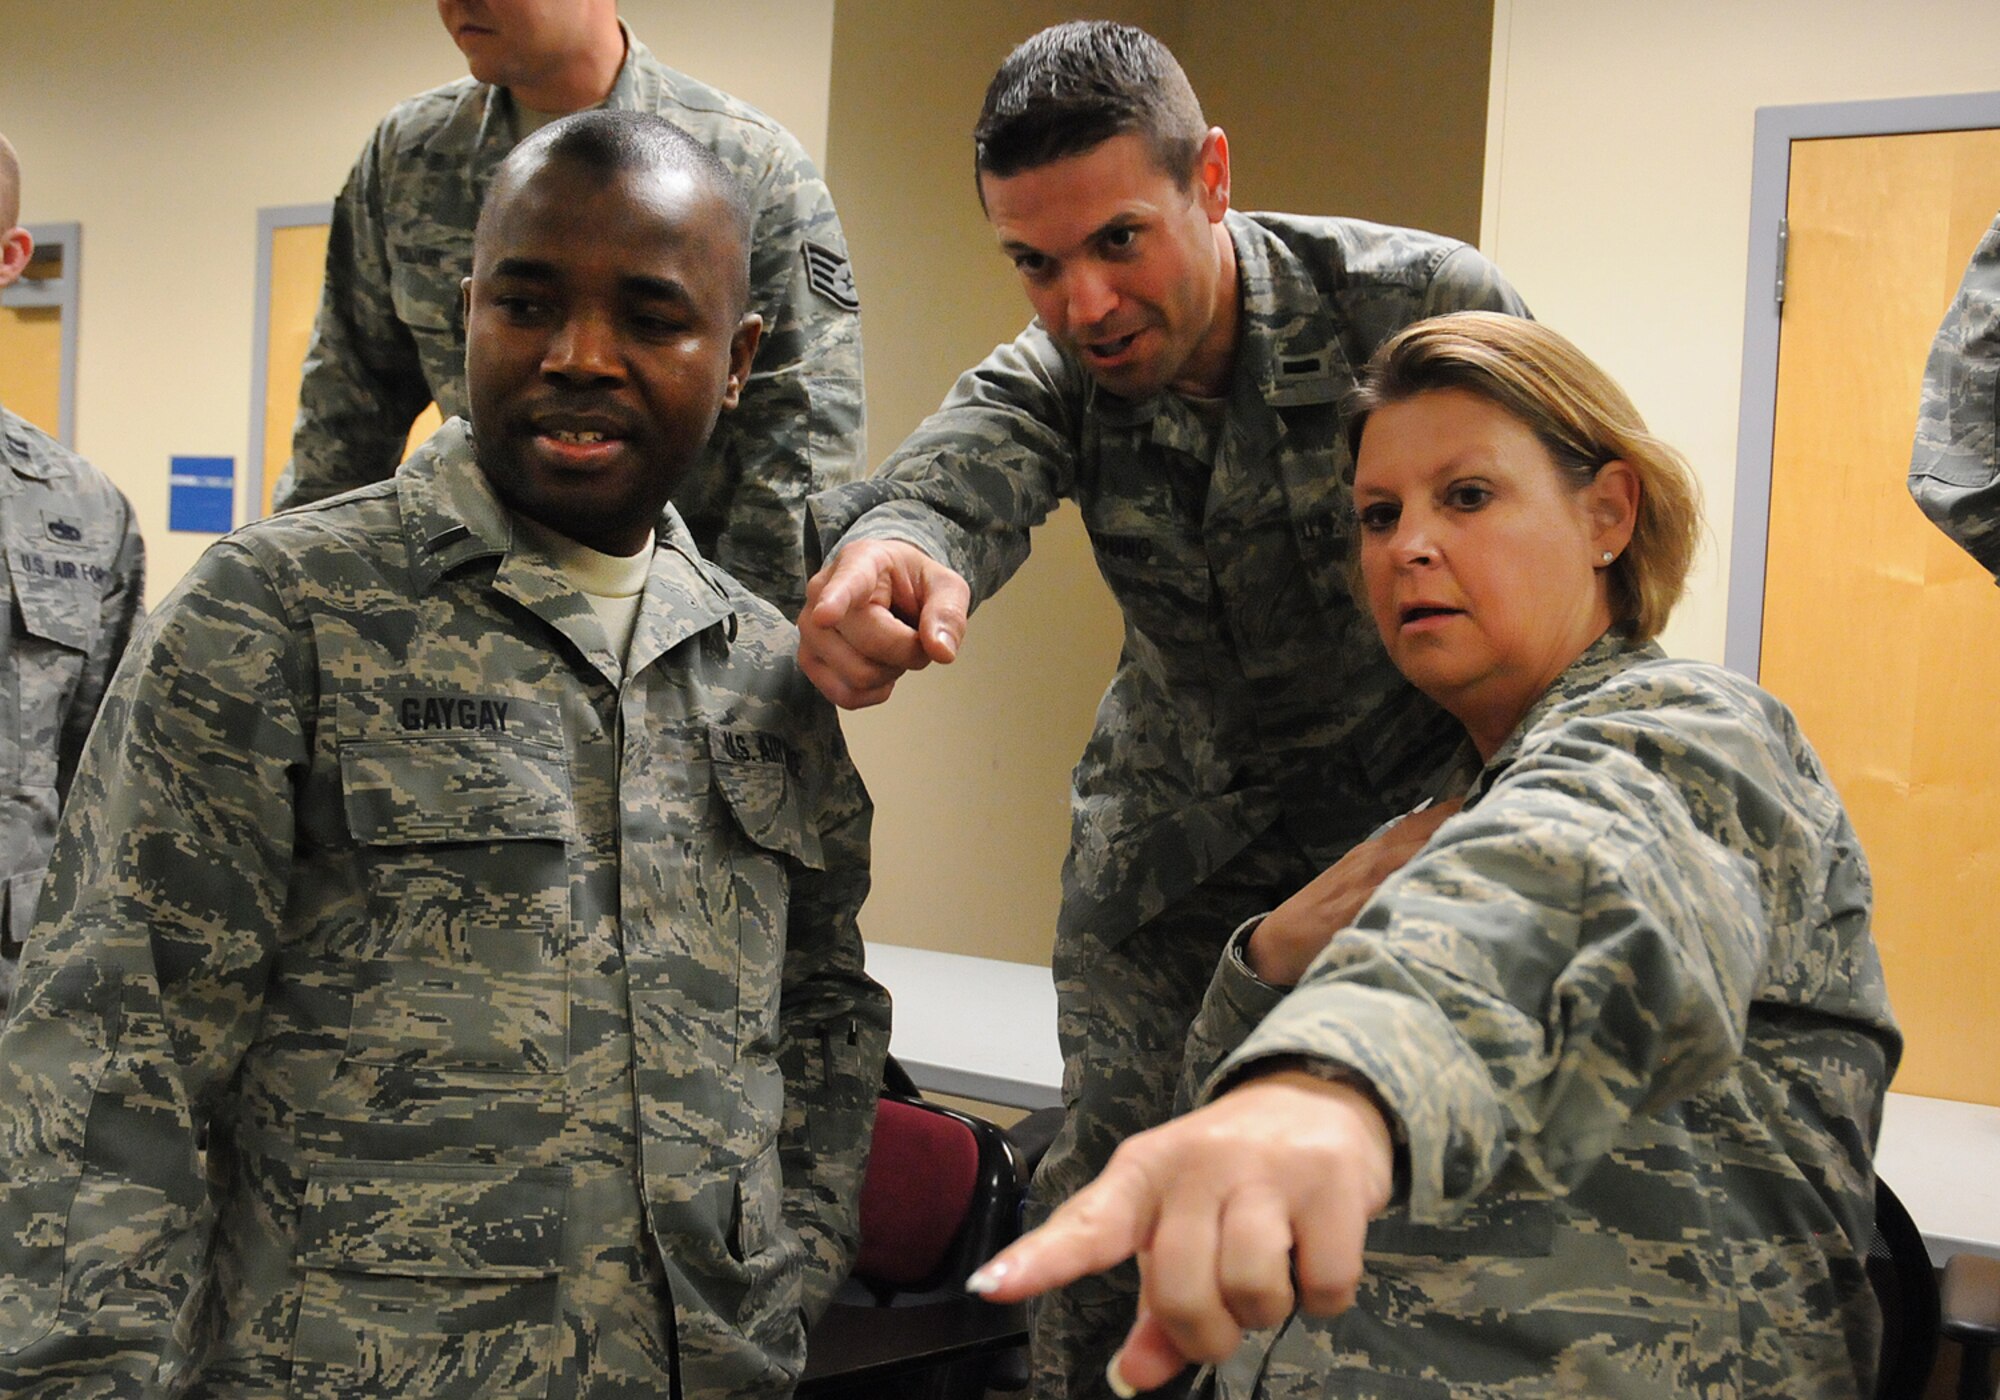 Lt. Col. Robin Cavanaugh (right), 138th Logistics Readiness (LRS) commander,  discusses strategy with team members,  1Lt. Joshua Young (center), 138th LRS, and 1Lt. Robert Gaygay (left), 138th Medical Group,  during a leadership meeting held Mar. 18, 2015, at the Tulsa Air National Guard Base, Okla.   Since August 2014, every Wednesday following their monthly unit training assembly, leaders from around the 138th Fighter Wing have shared various leadership perspectives, and encouraged open and honest communication while learning from each other at wing leadership meetings .  (U.S. National Guard photo by Senior Master Sgt.  Preston L. Chasteen/Released)